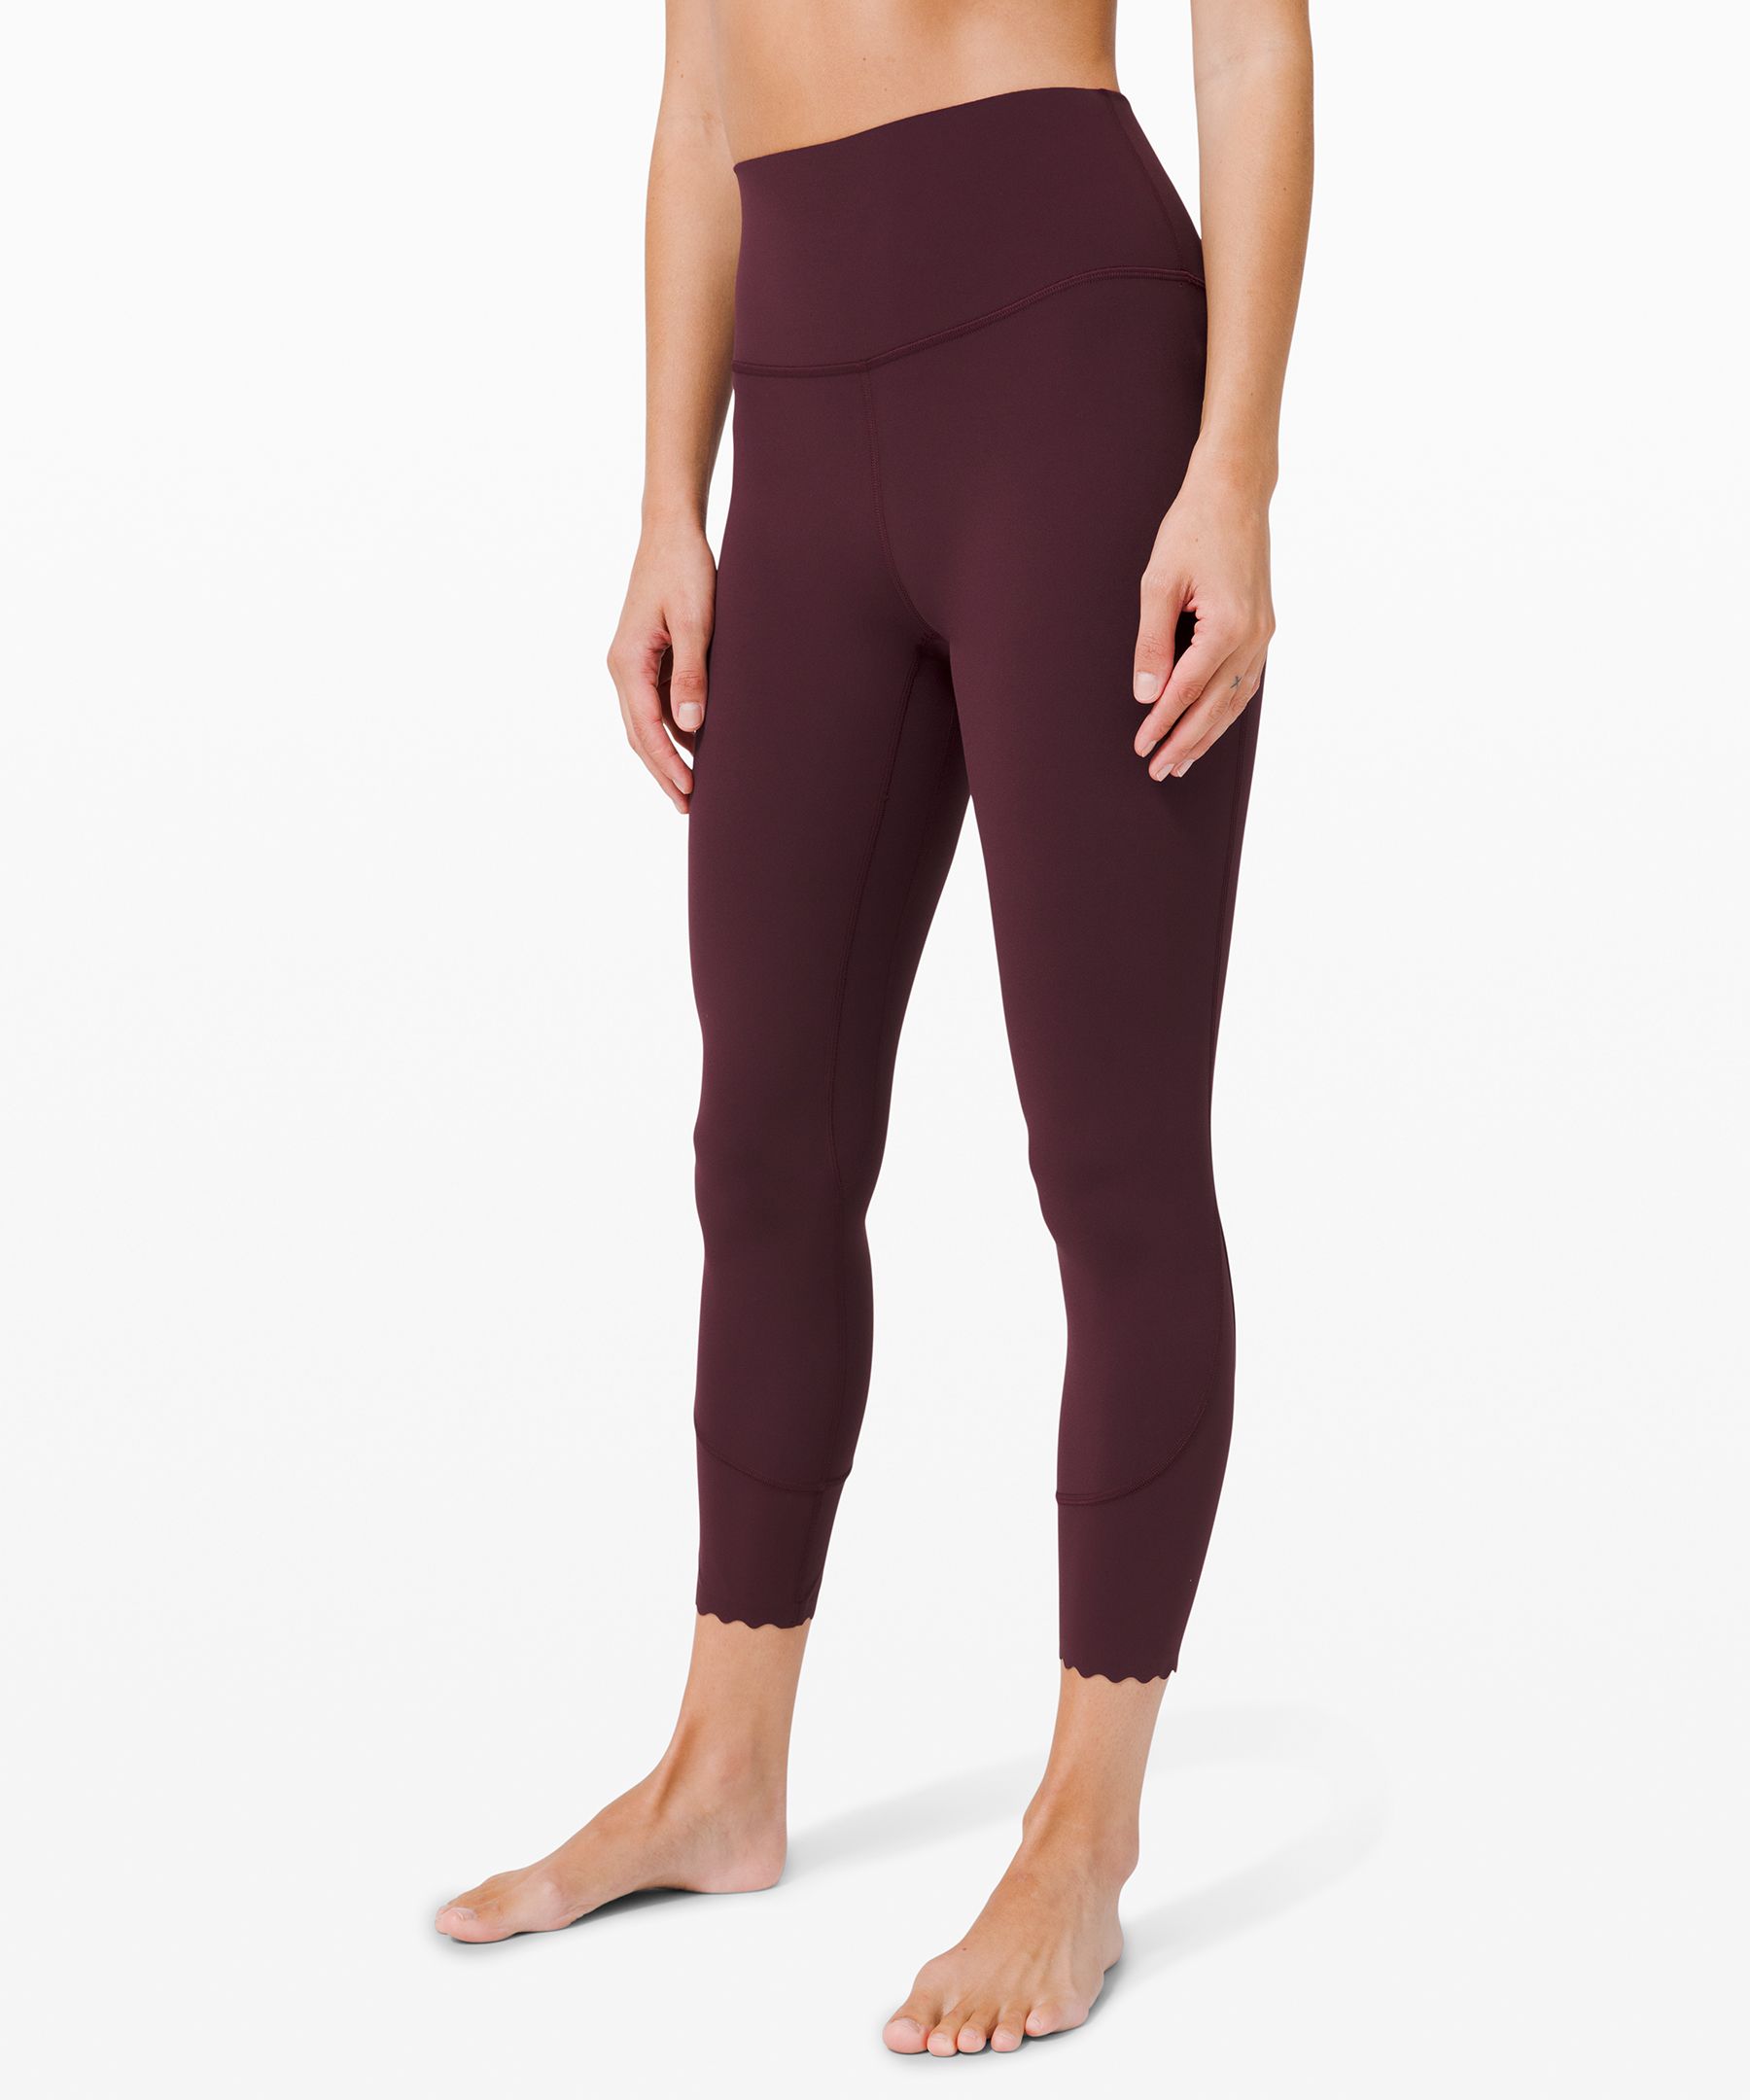 size down in align pant